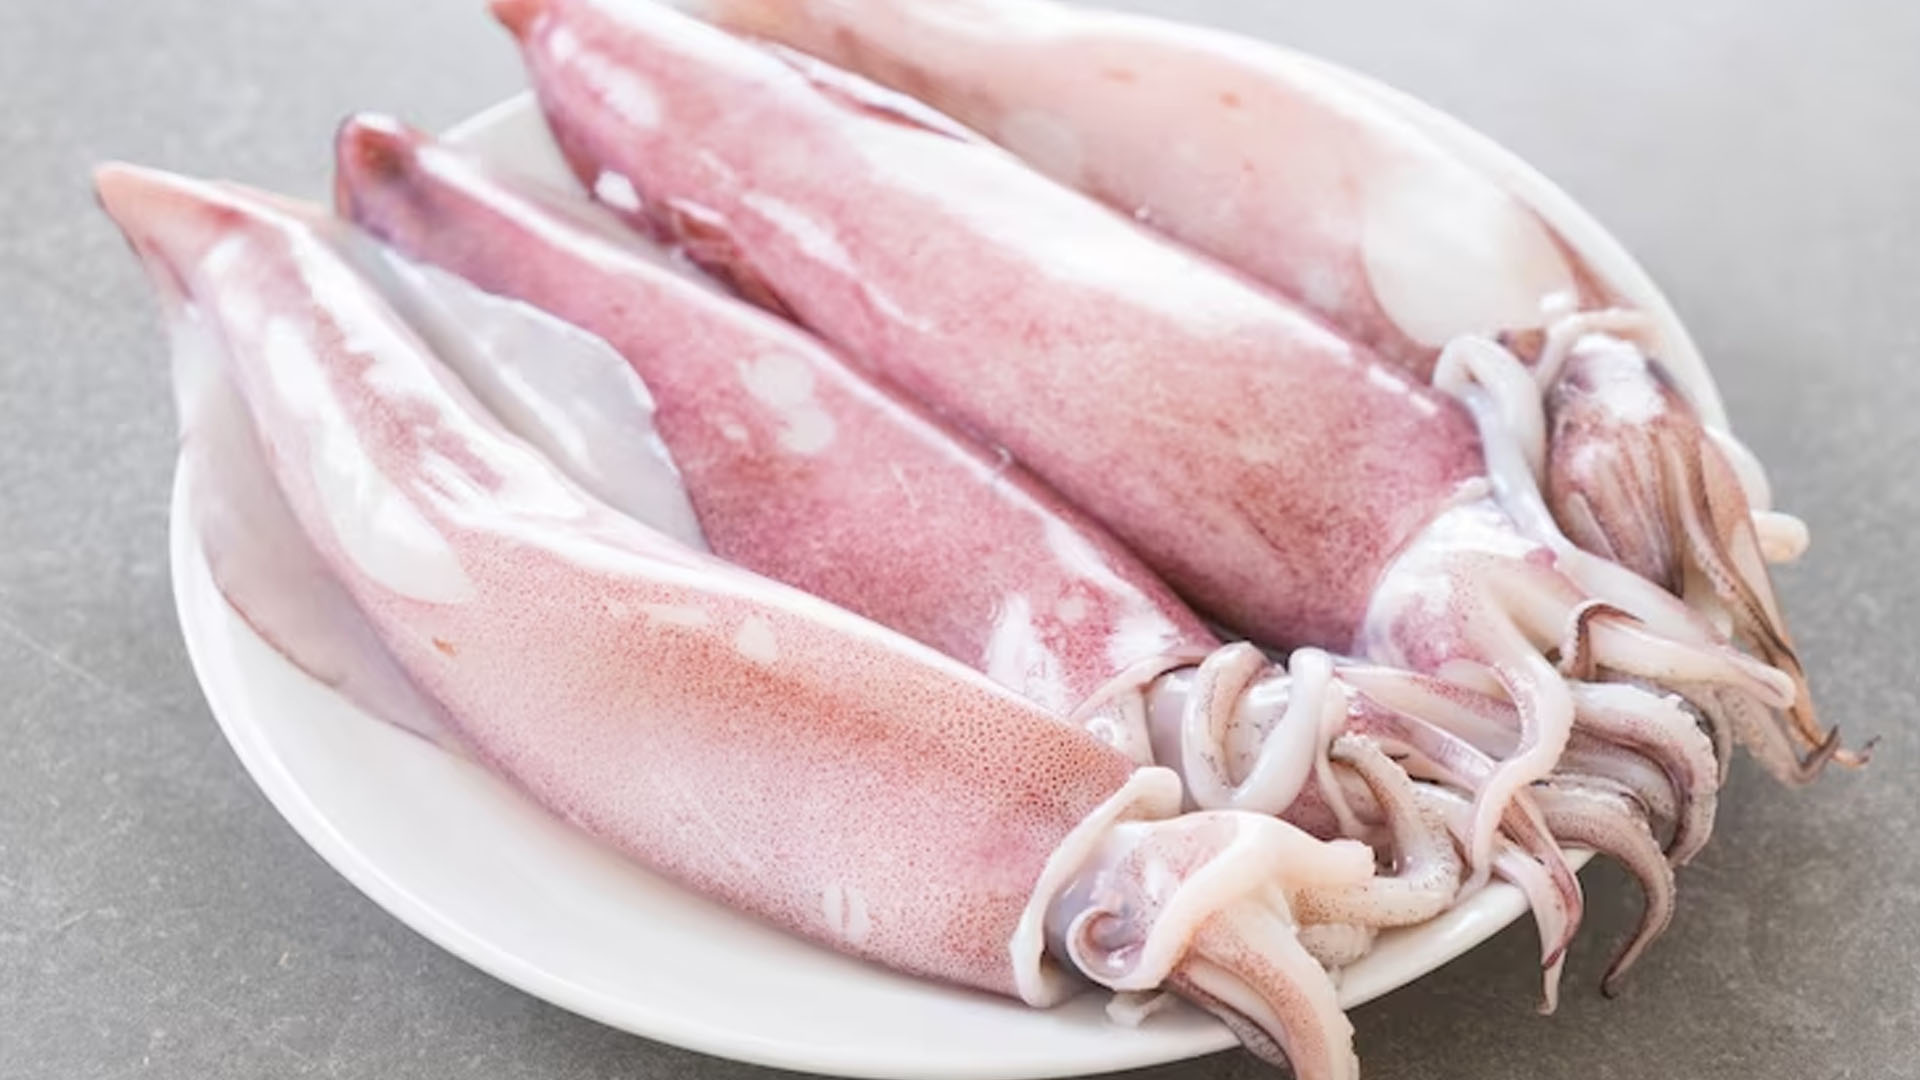 Does Squid Have Health Benefits?